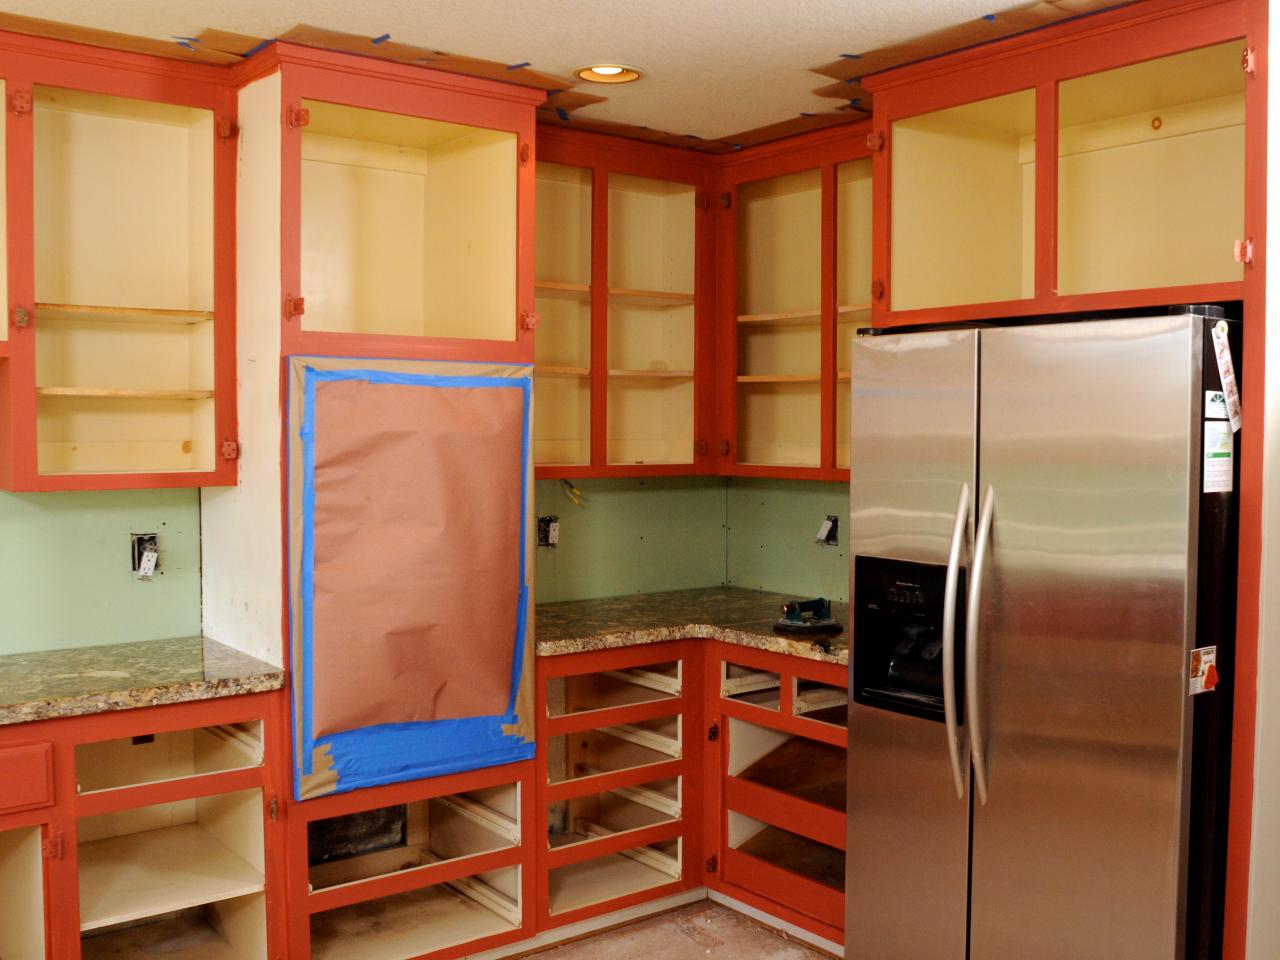 How To Paint Kitchen Cabinets In A Two, Painted Cabinets With Wood Stained Doors